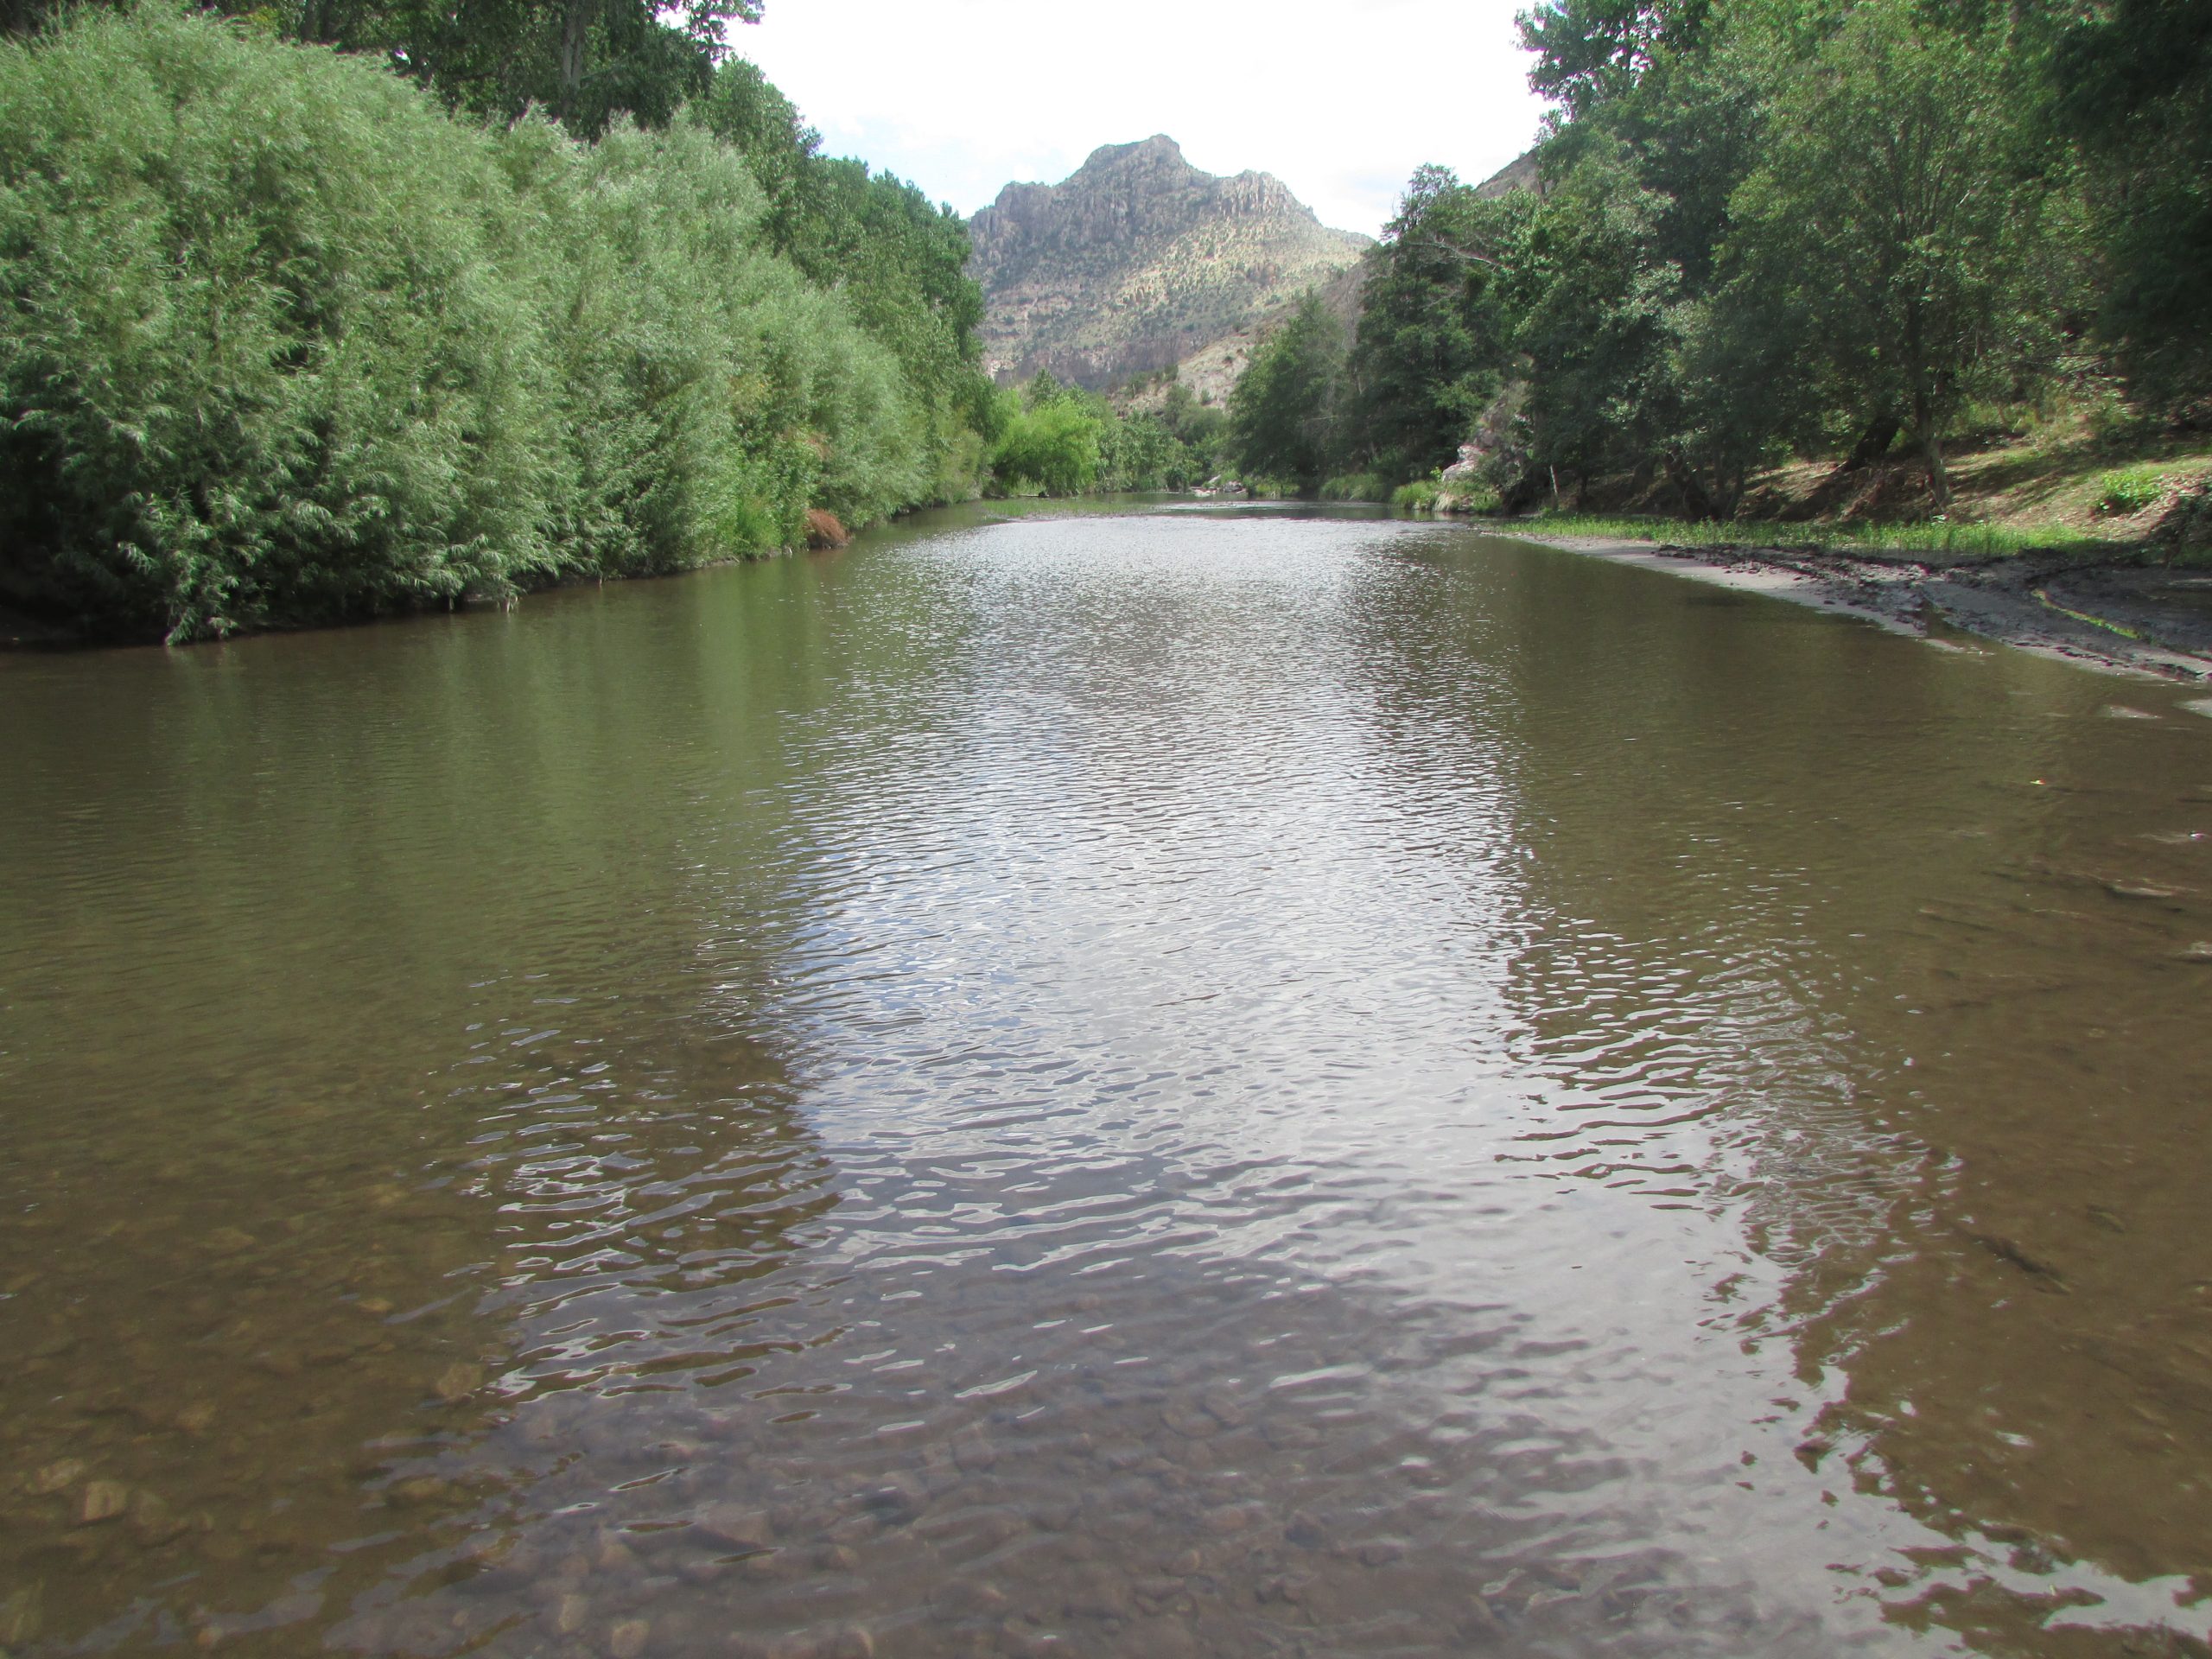 Faced with costs, officials scale back Gila diversion plans